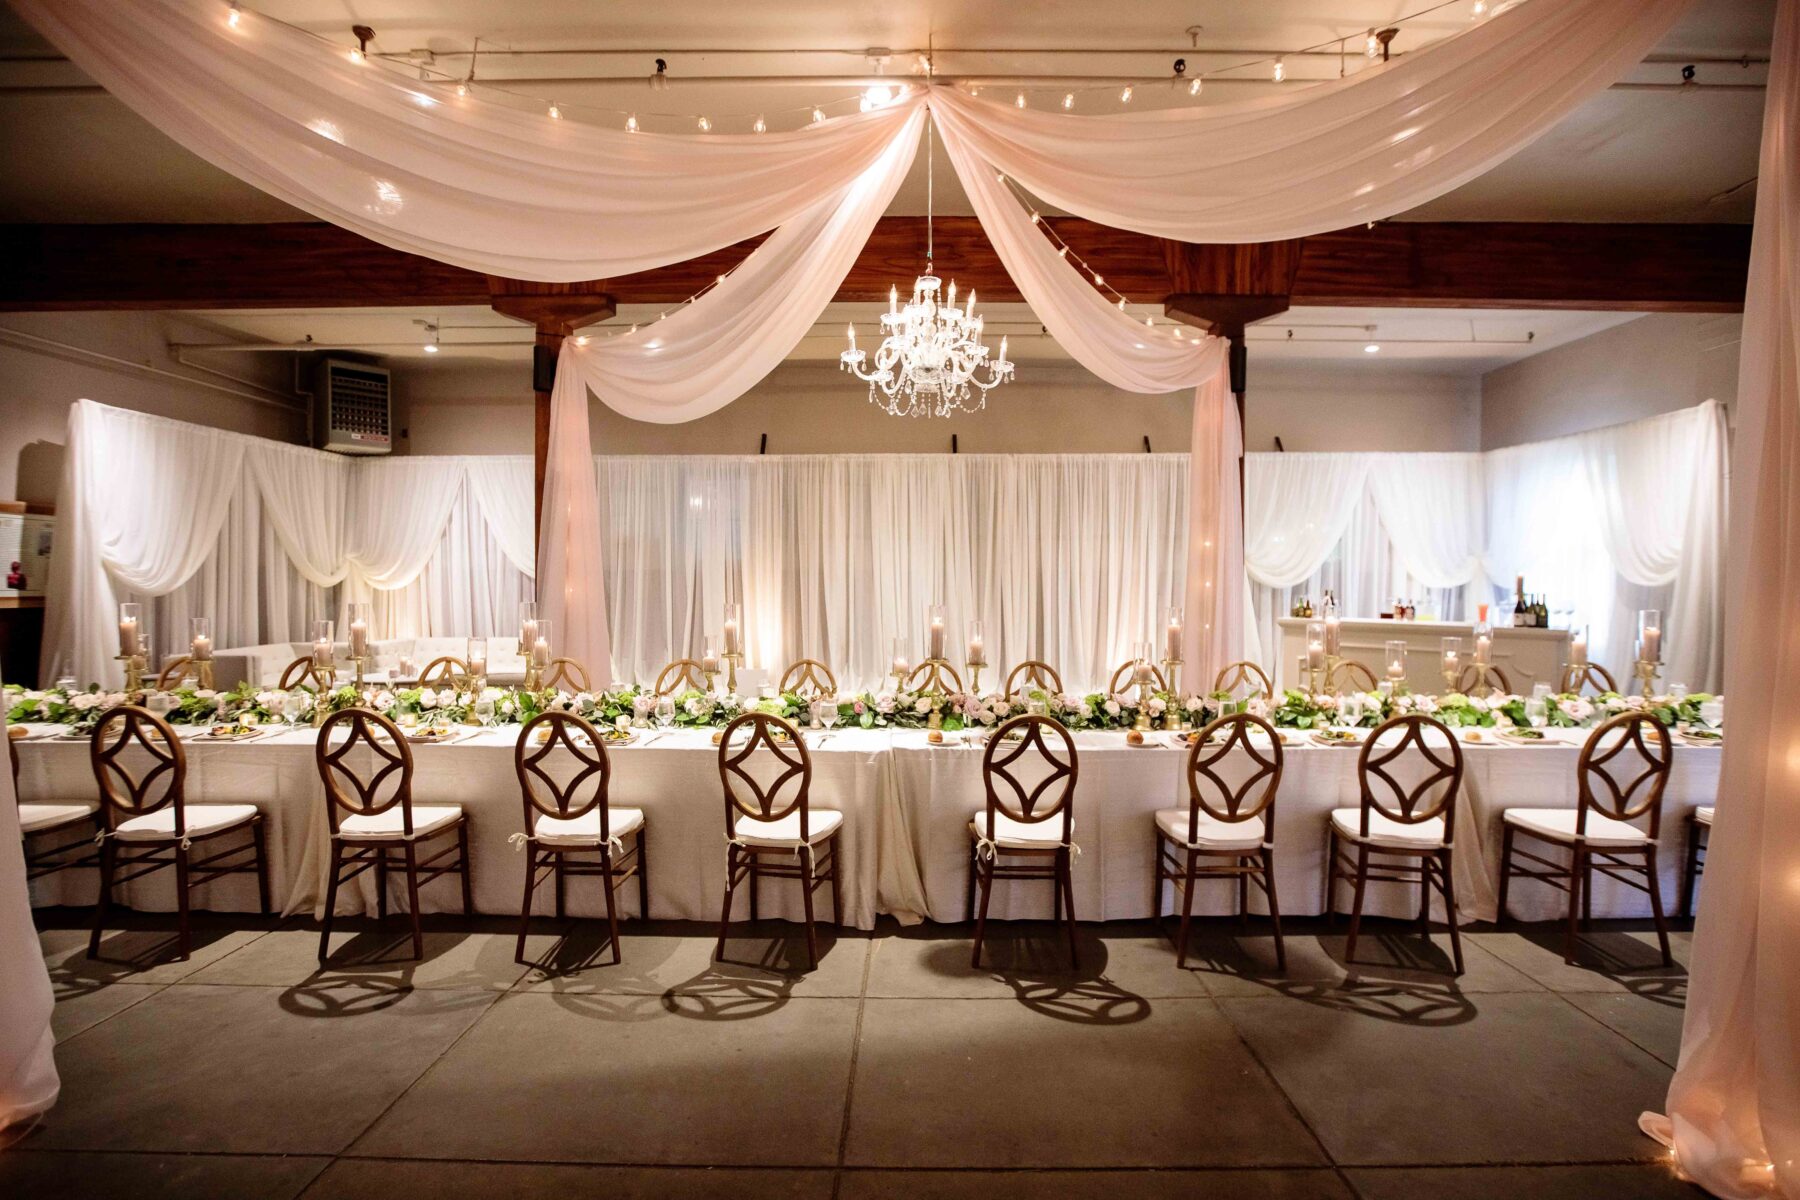 Meet Events Plus & Creations by Debbie: Where Custom Services and Attention to Detail Collide | Nashville Bride Guide